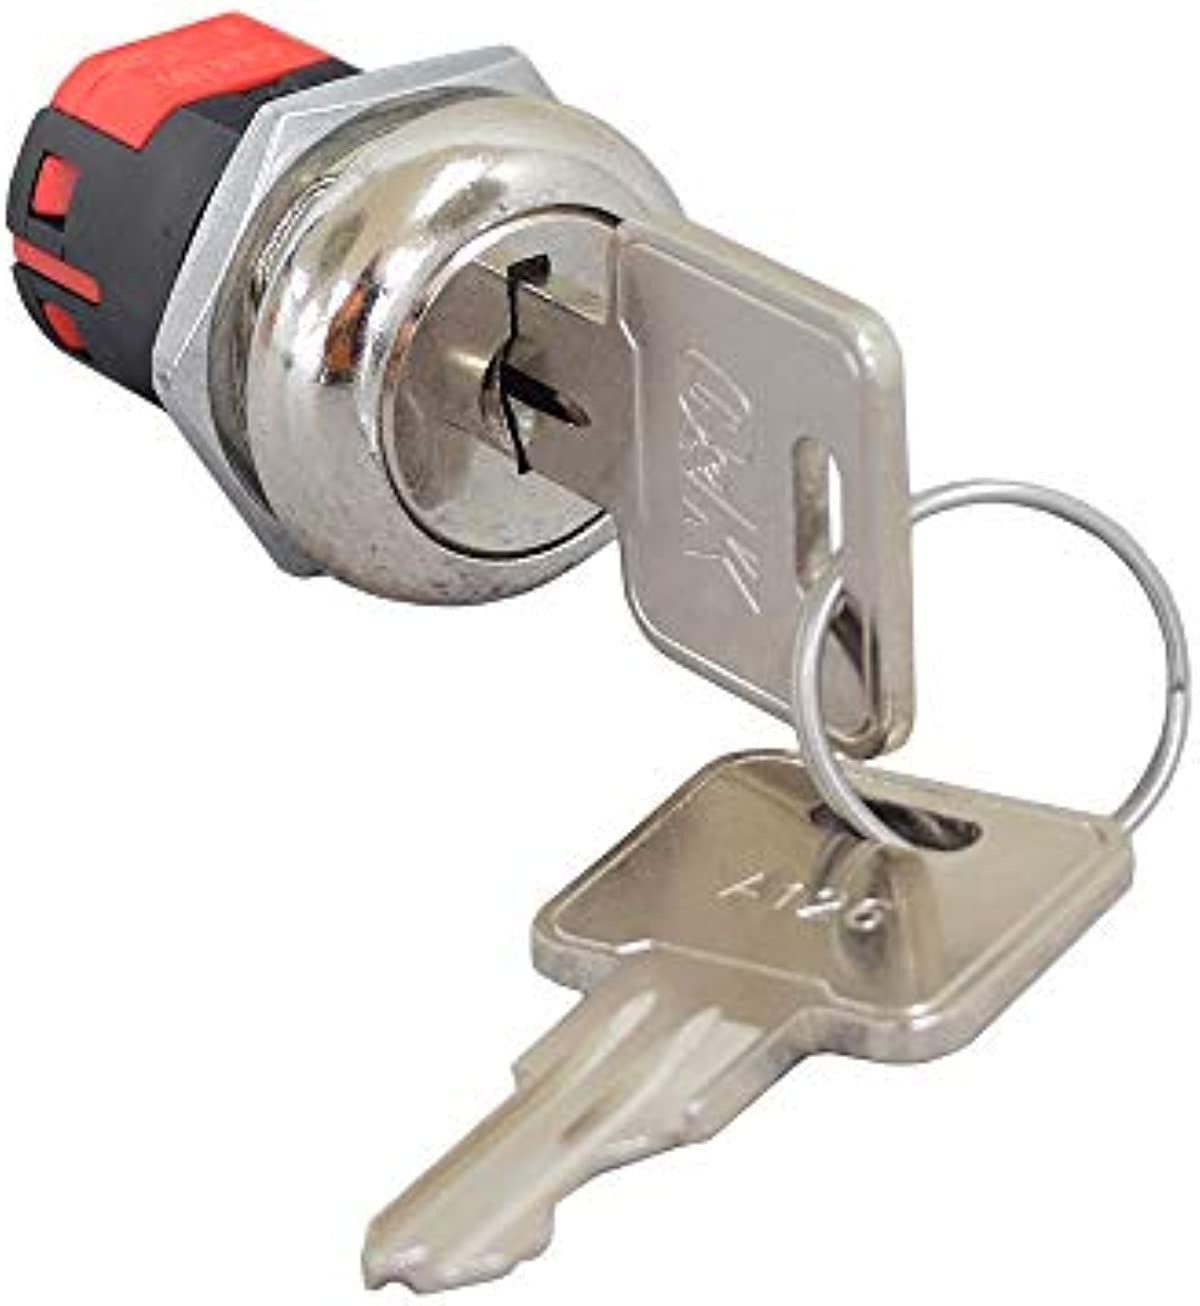 AlveyTech 3-Prong Key Switch with Easy Pull Keys - Replacement for Amigo, Go-Go, Mega-Motion, PaceSaver, Pride, Rascal, Mobility Scooter, Power Chair, Folding Medical E-Scooter, Electric Wheel Chairs